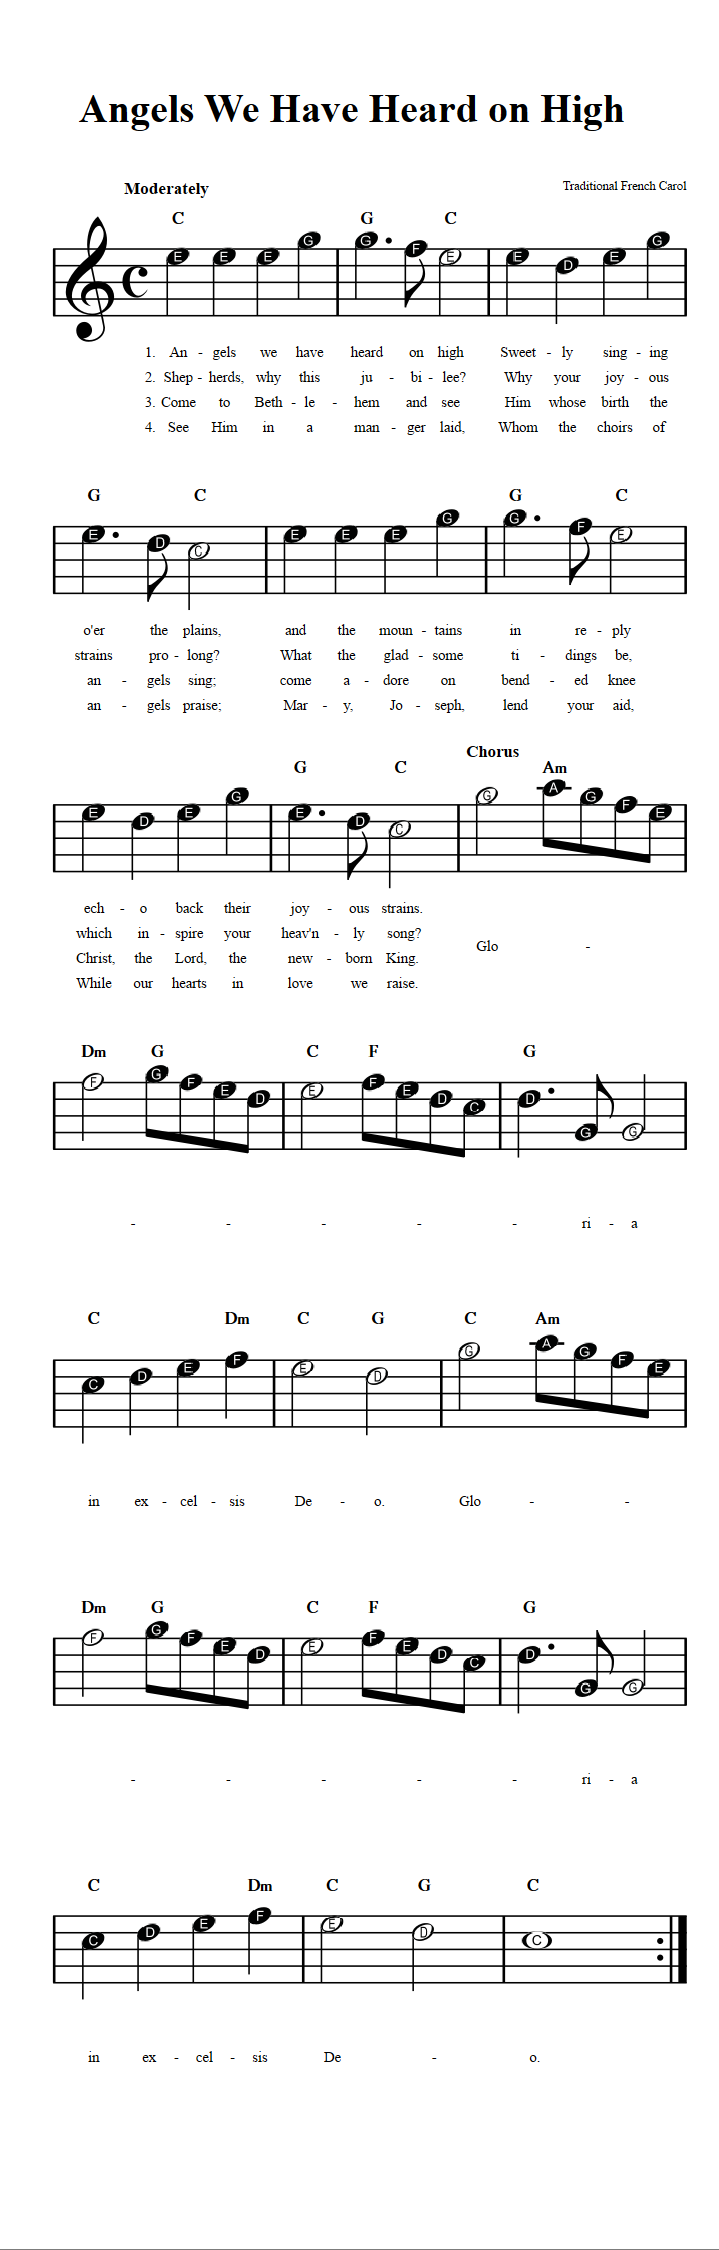 Angels We Have Heard On High Beginner Sheet Music With Chords And Lyrics